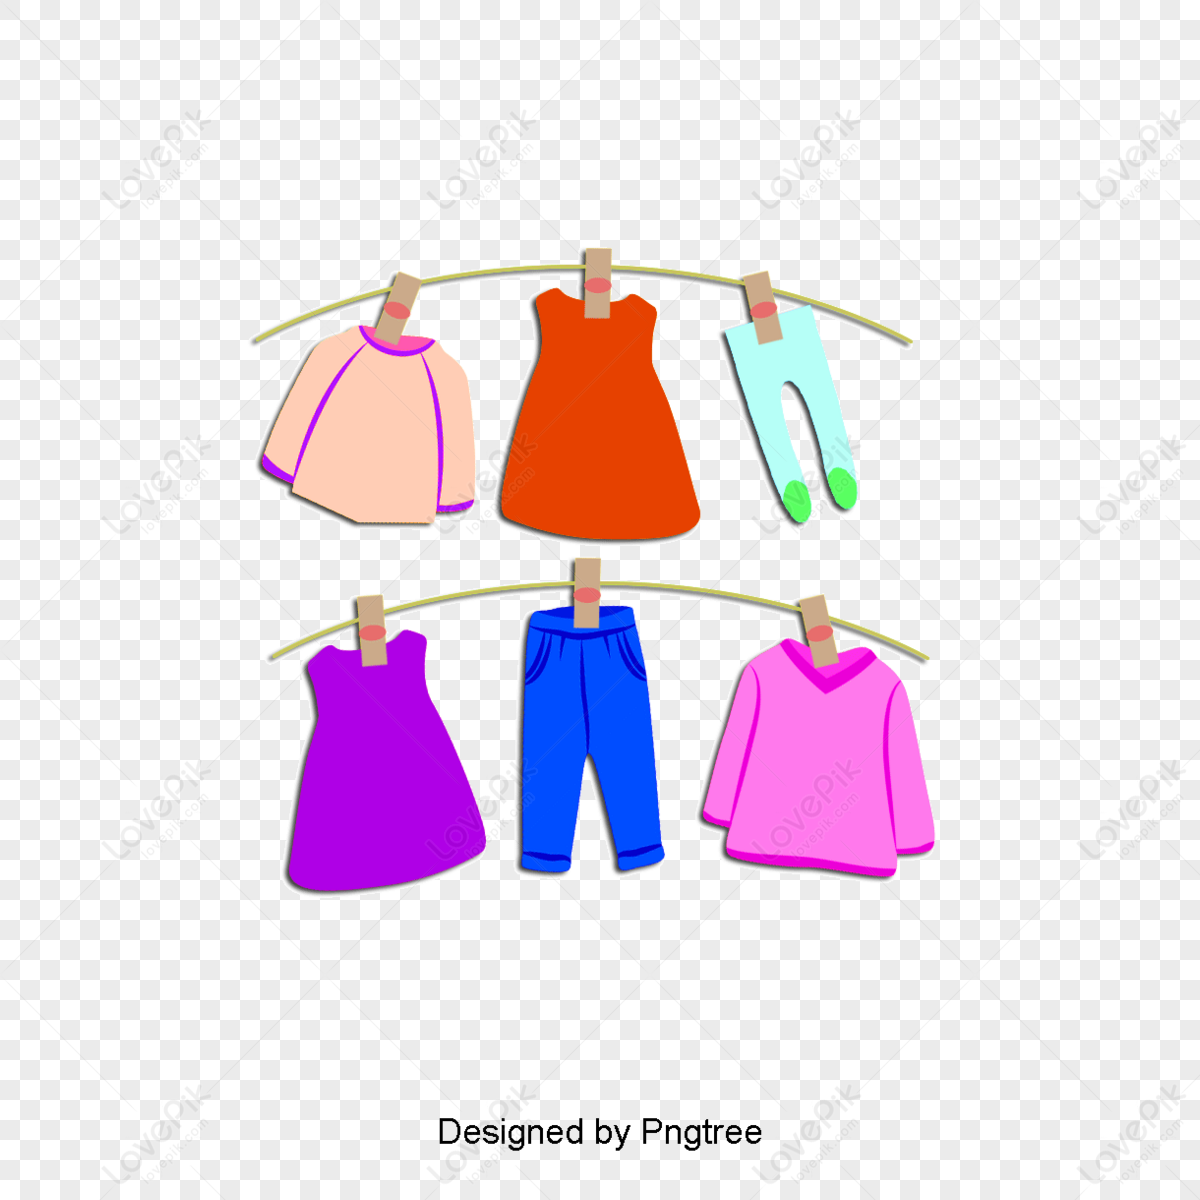 Clothes, Folding, Clothes Clipart, Clothesline PNG Free Download